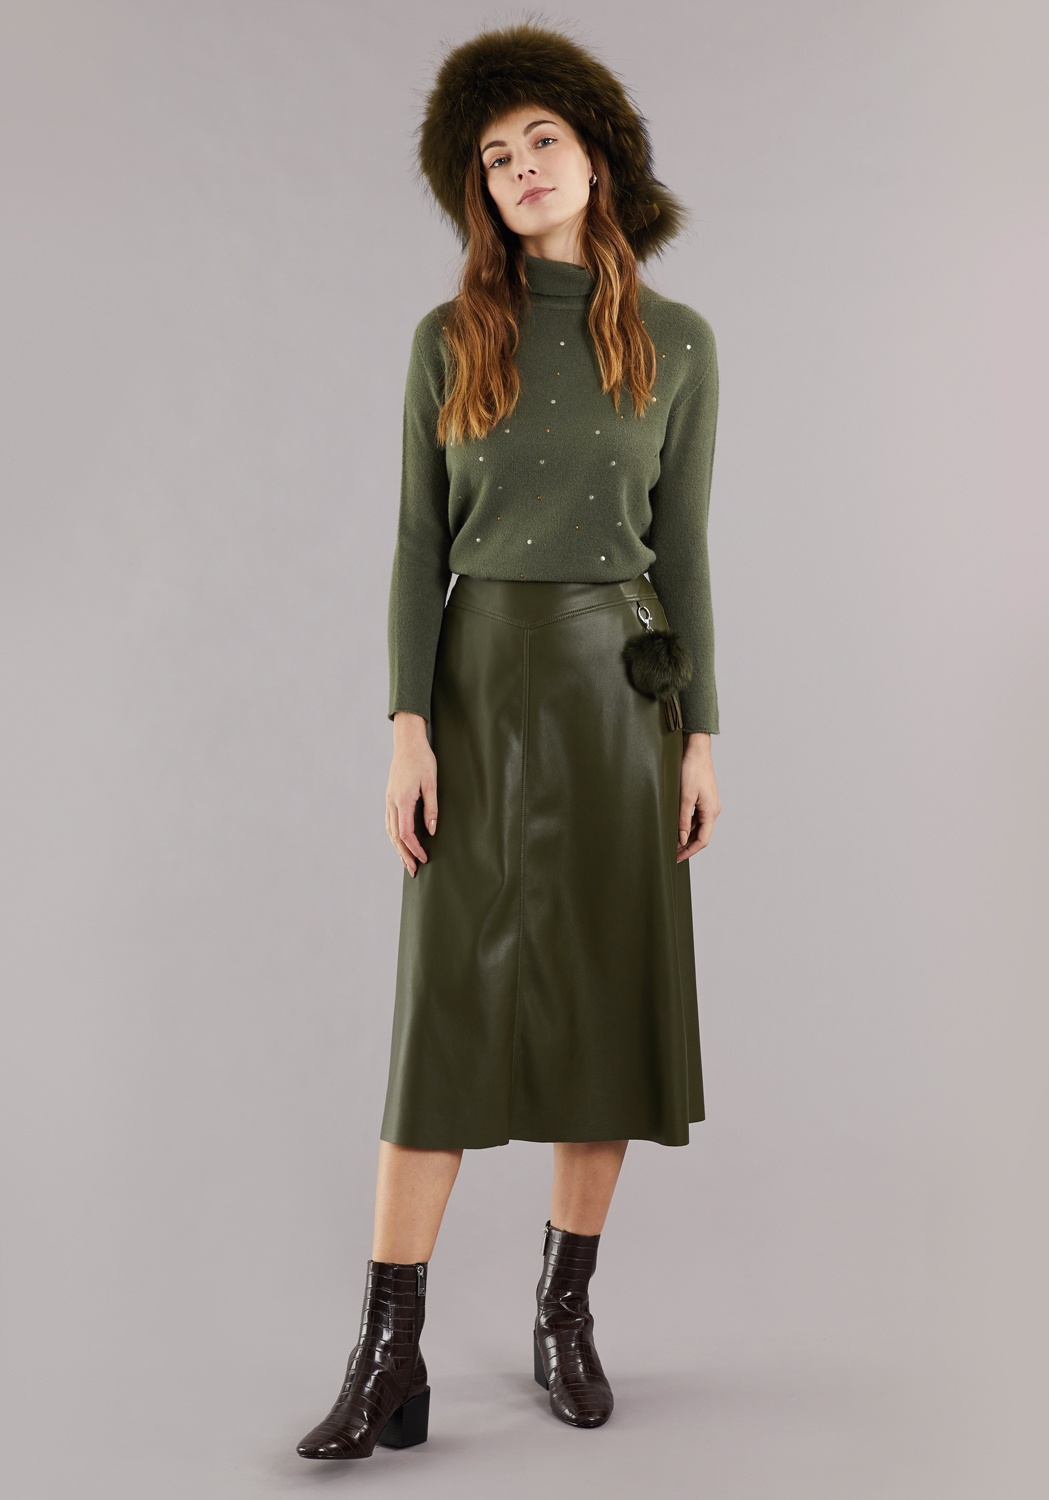 Green Faux Leather Skirt 3